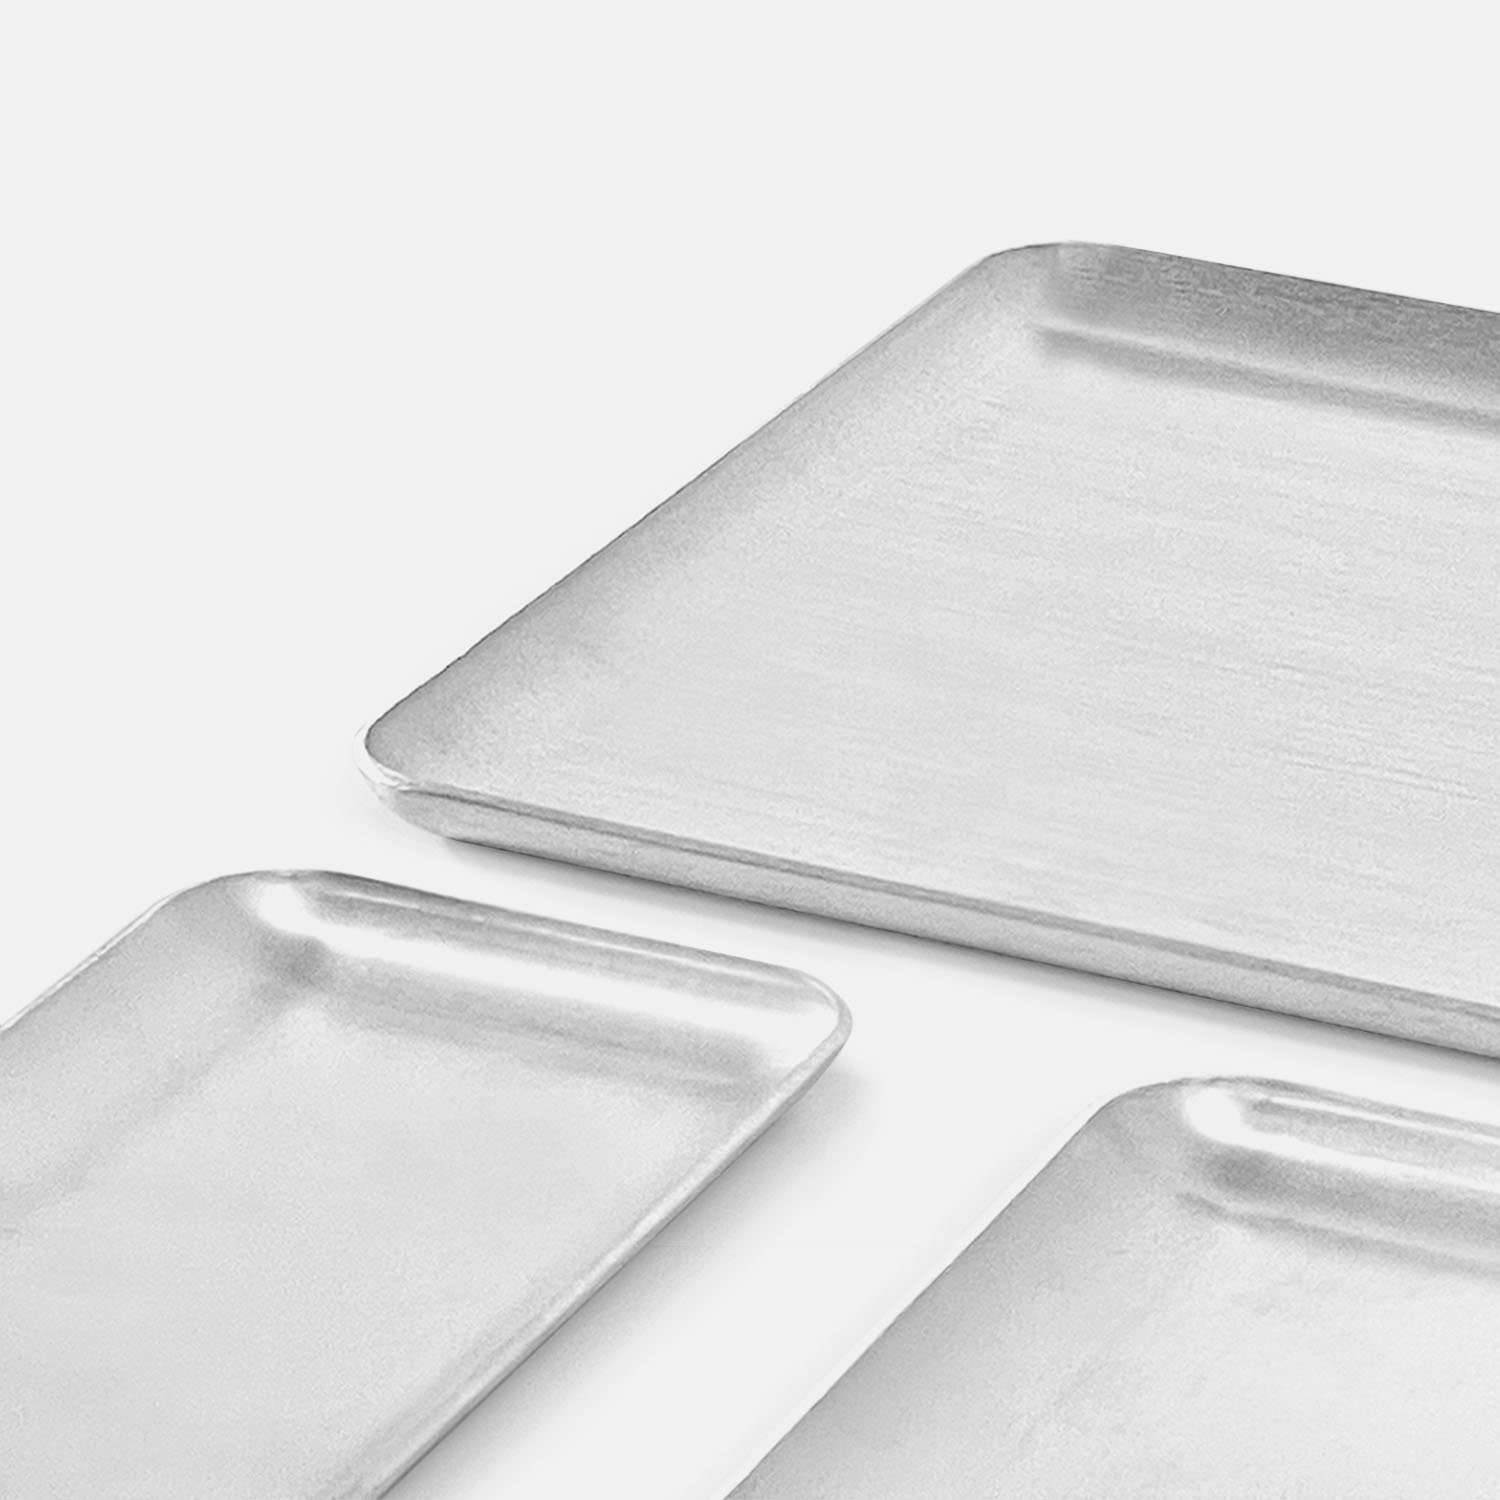 NOOSHE JAAN Engraved Square Small Trays for Individual Tea